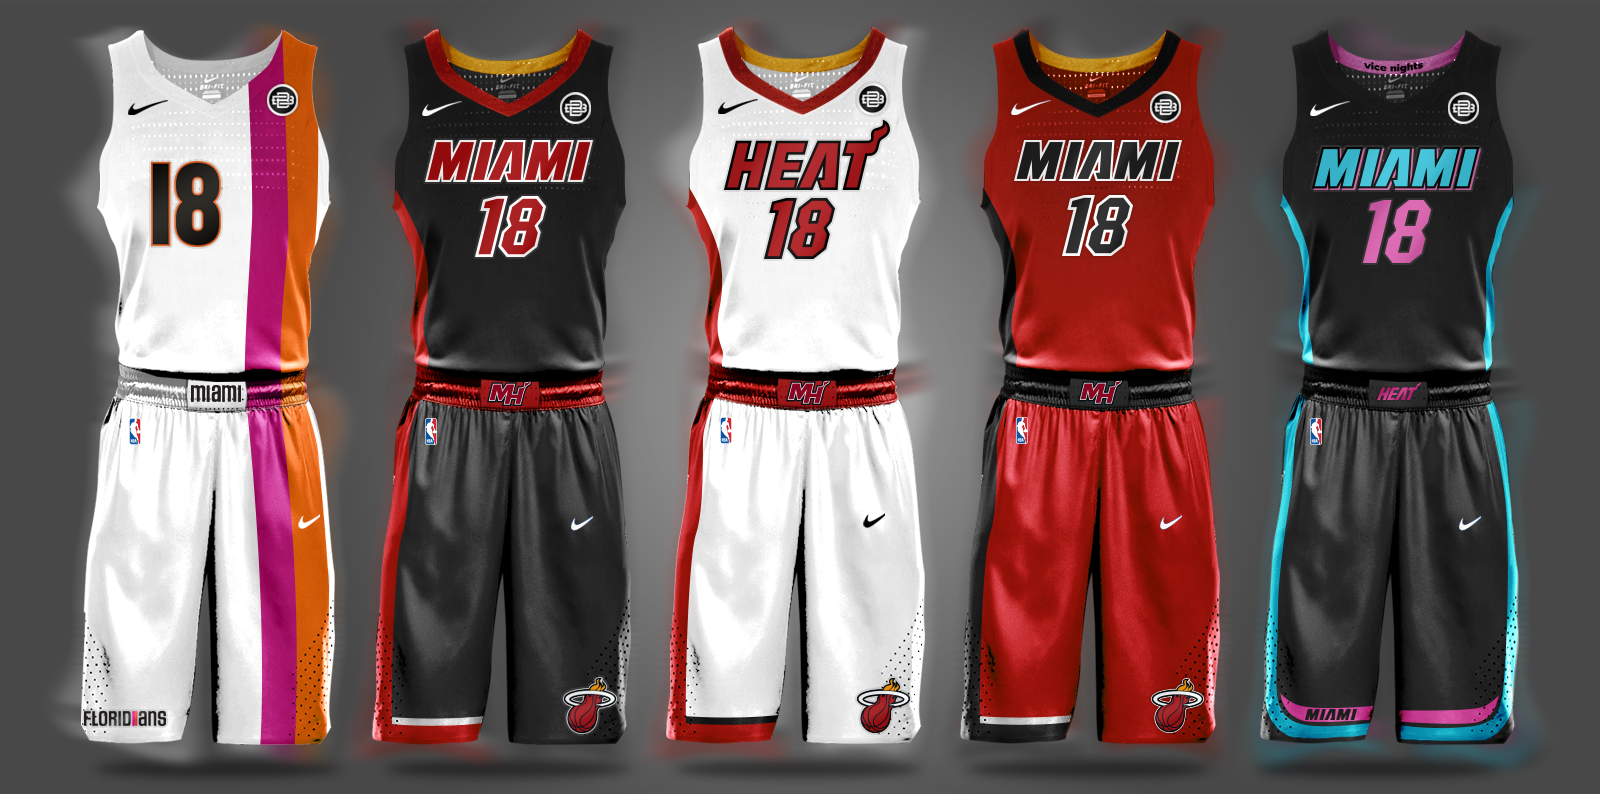 Look: NBA uniform concepts for some of the league's best teams